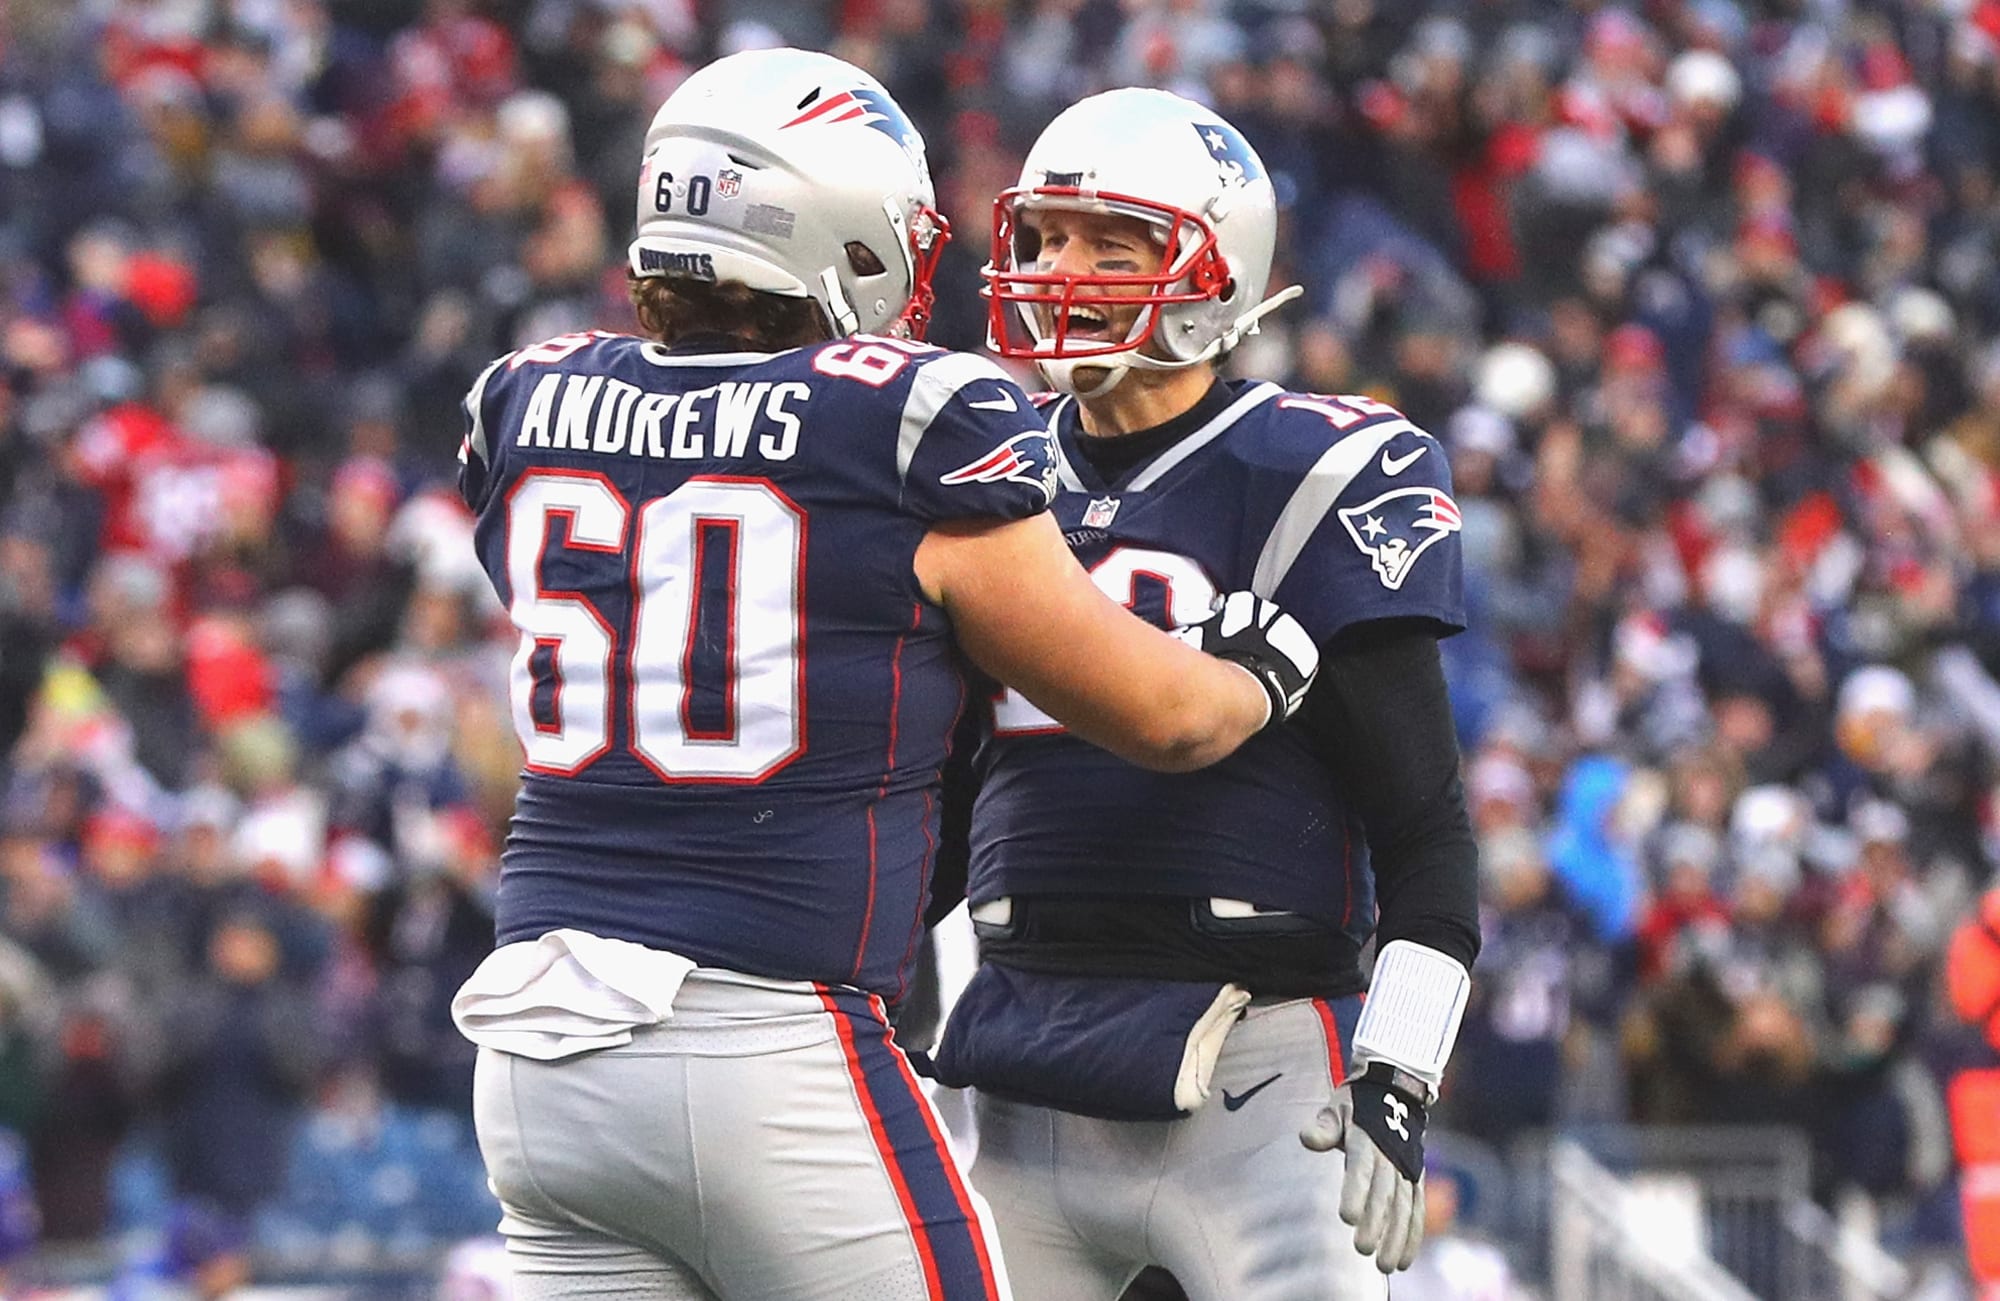 David Andrews returns to Patriots after missing two weeks due to